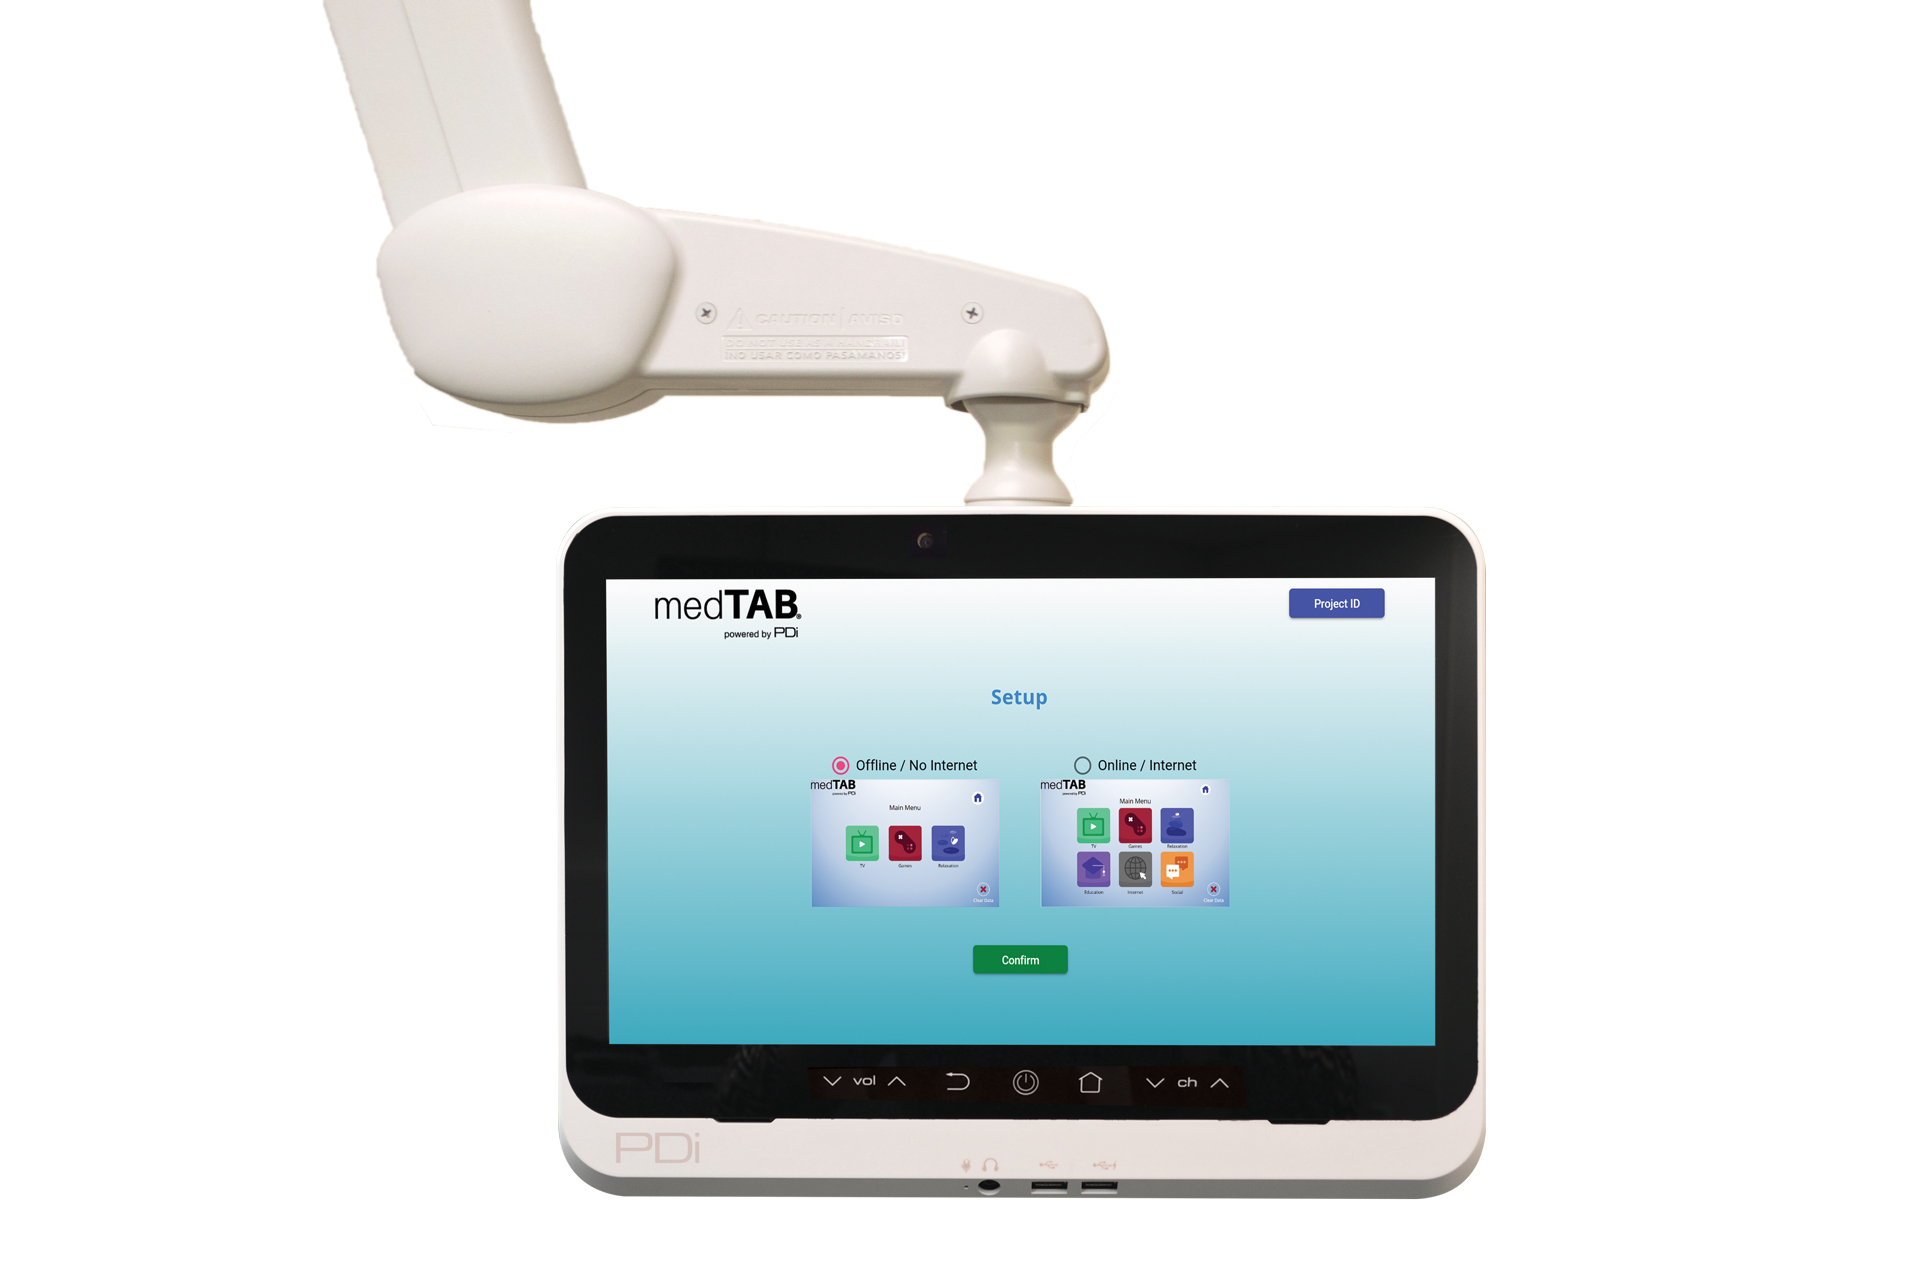 Product image of the medTAB16 healthcare television built by PDi Communication Systems, Inc. on the set up screen choosing between internet or no internet connection